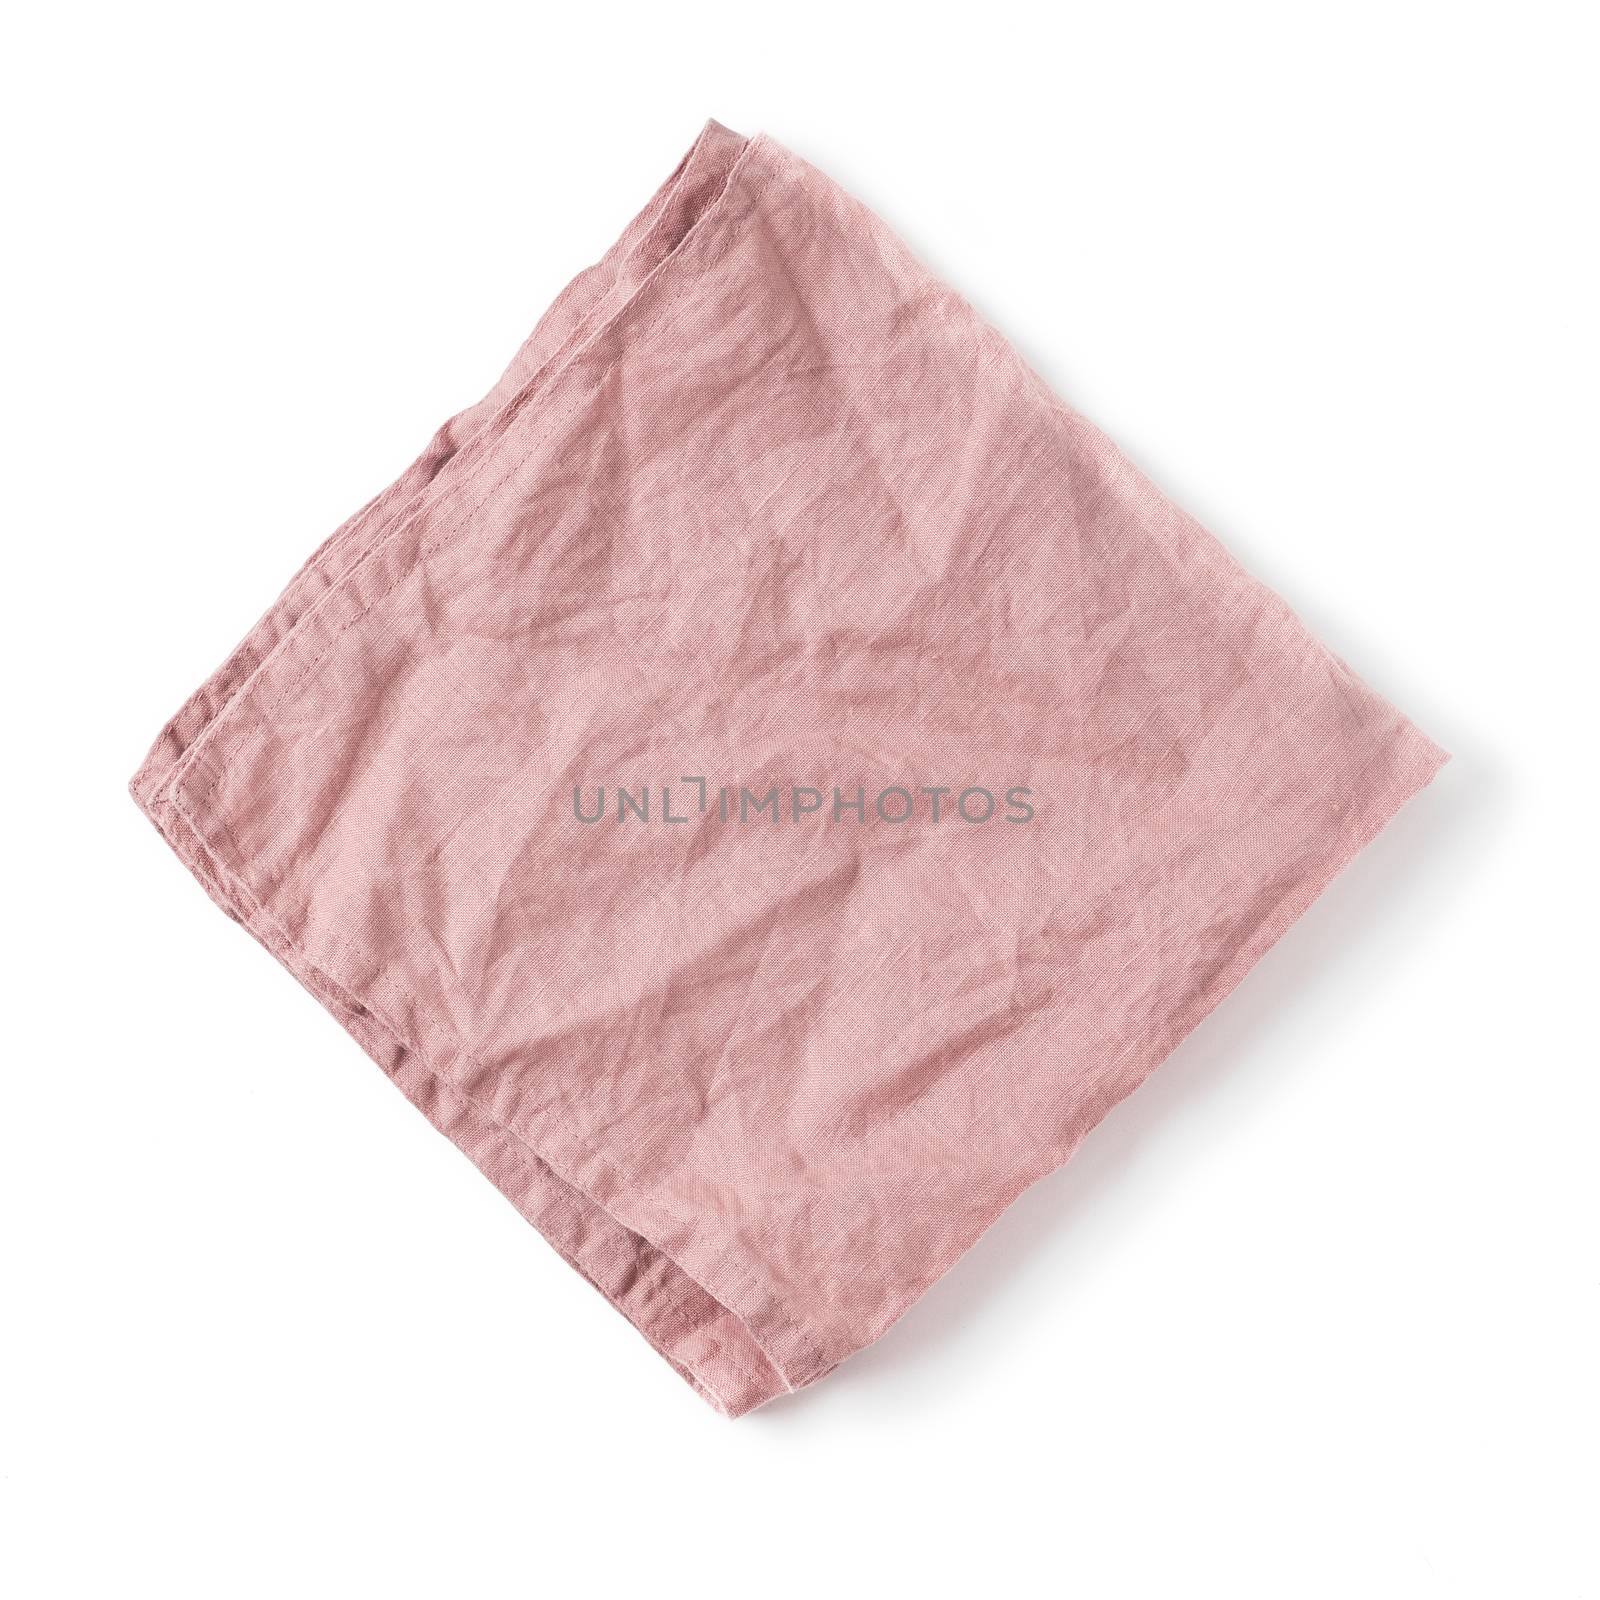 Folded old rose color linen napkin isolated on white background. obscure pink linen napkin. Isolated on white with clipping path. Top view or flat lay.